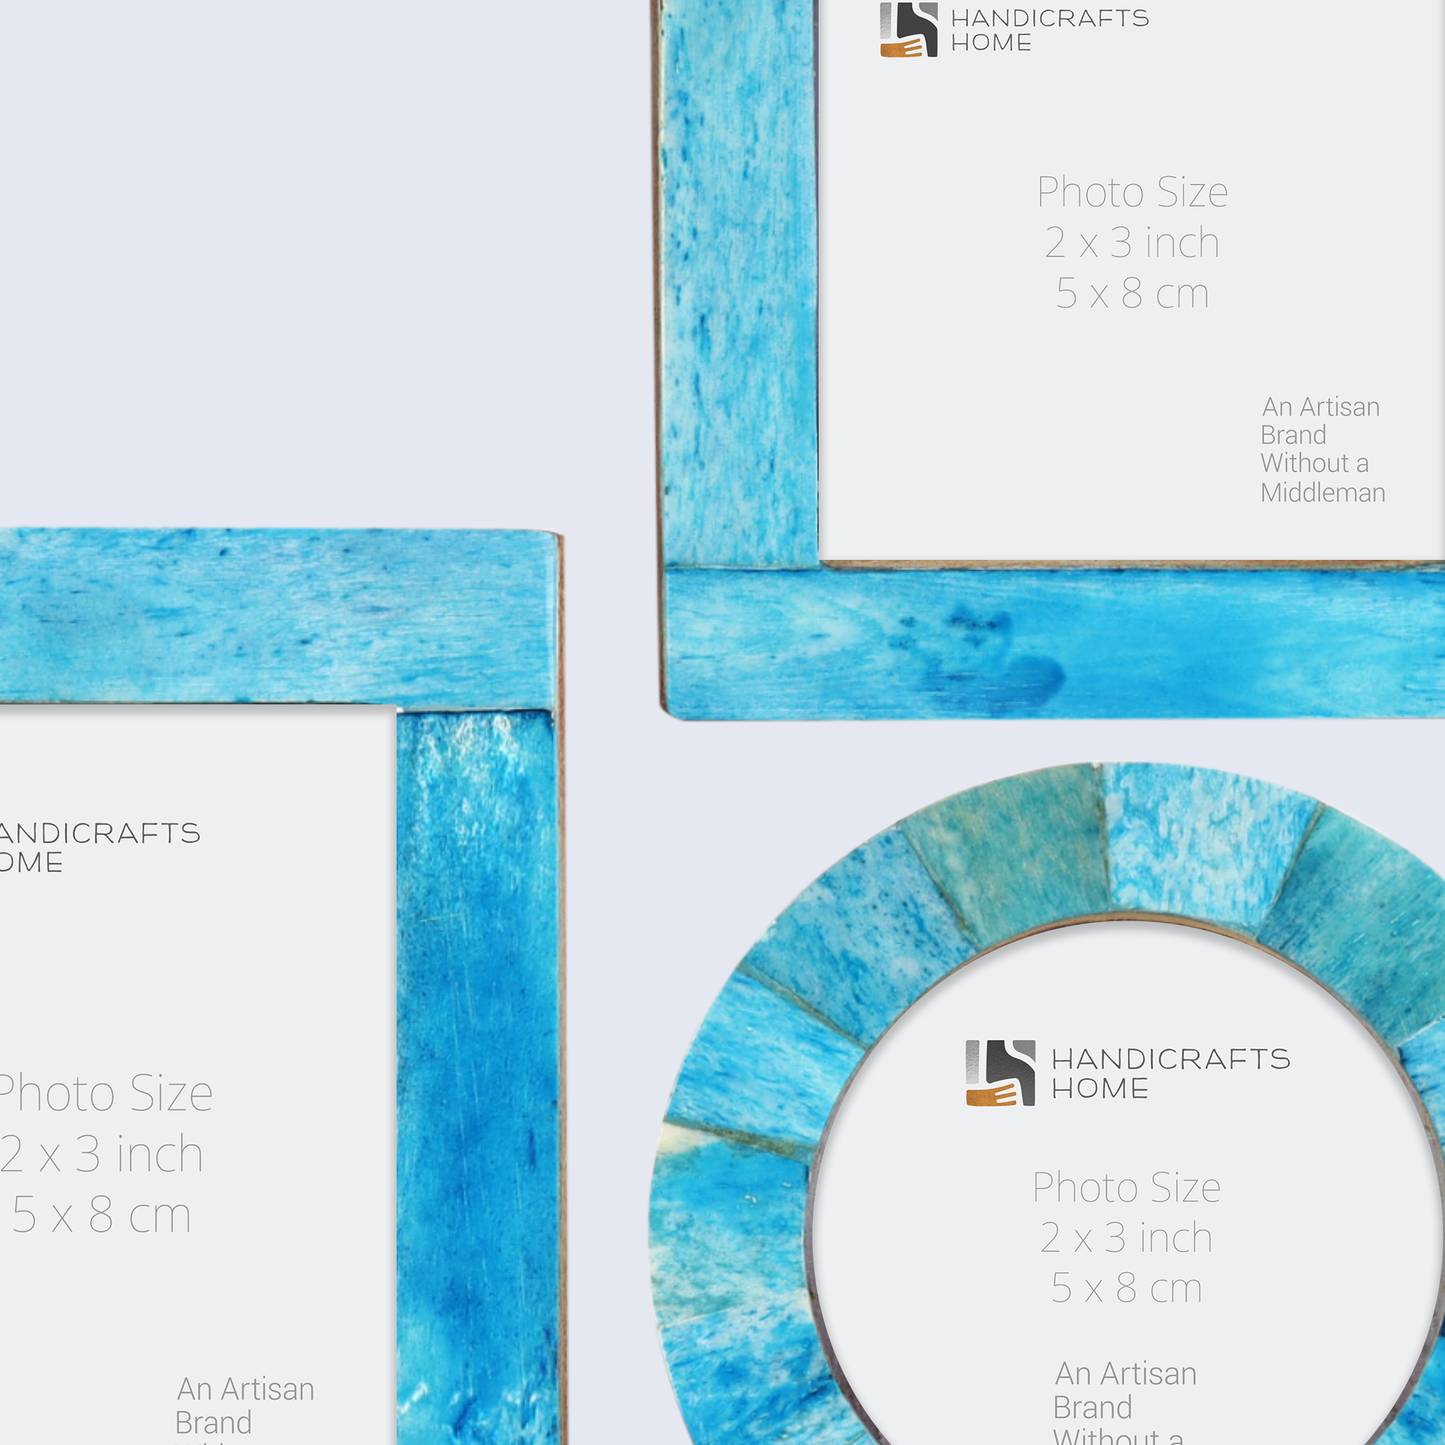 Baby Photo Frames Set of 3 Pieces Turquoise (3x4, 3x3, 3x3 Inches)